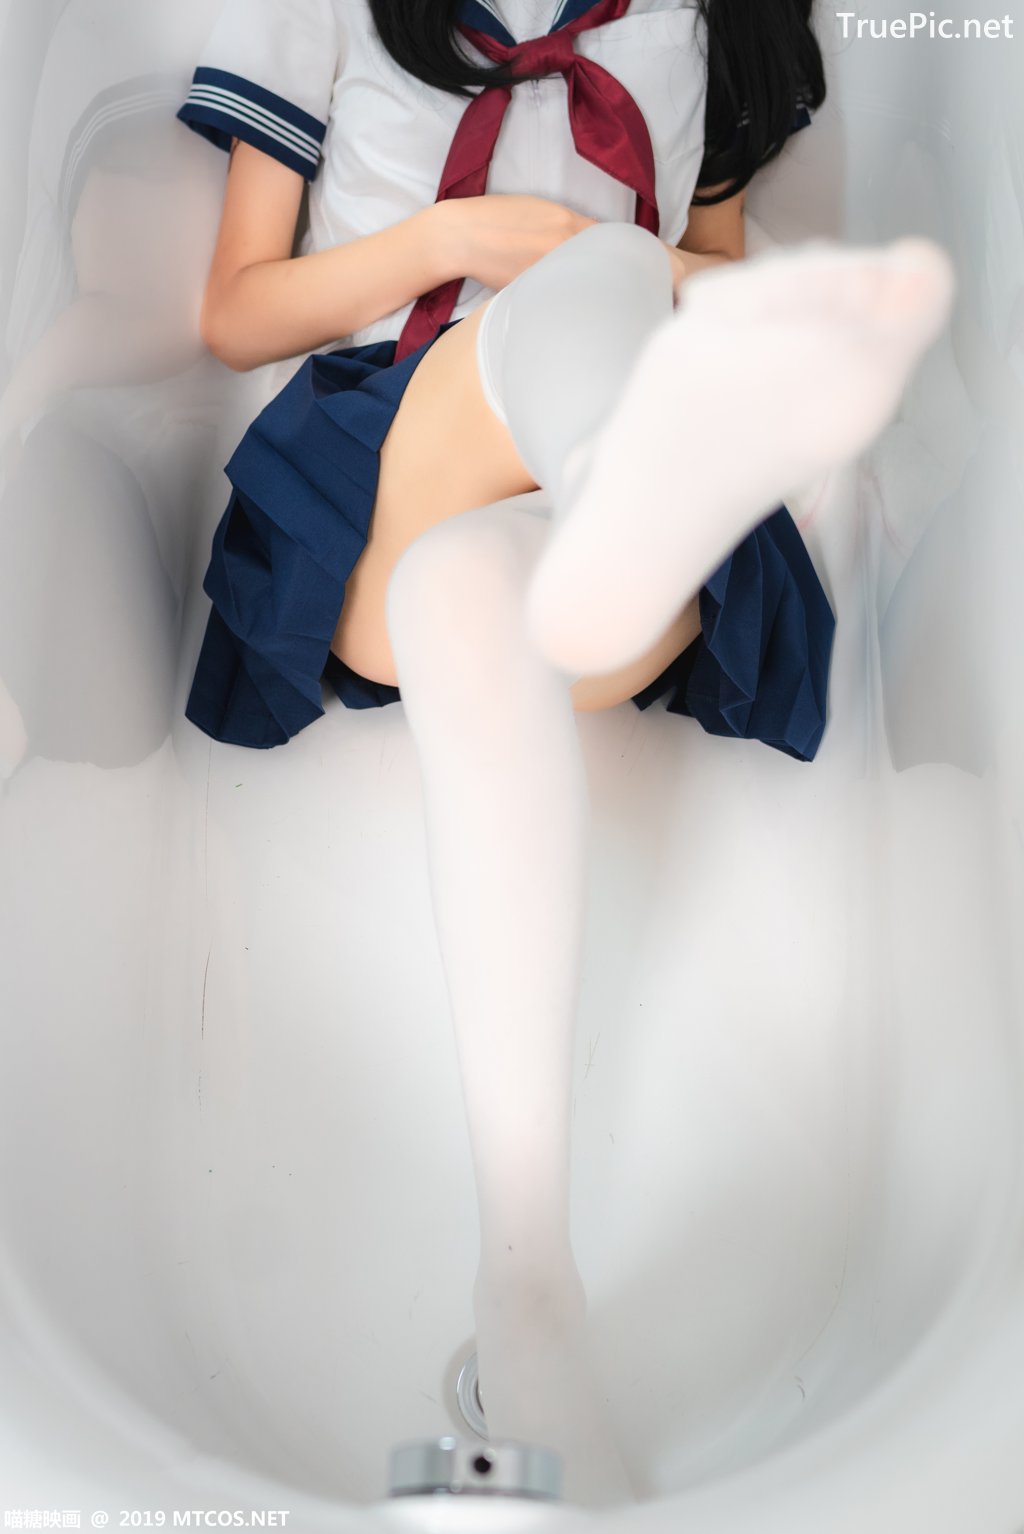 Image-MTCos-喵糖映画-Vol-012–Chinese-Pretty-Model-Cute-School-Girl-With-Sailor-Dress-TruePic.net- Picture-40